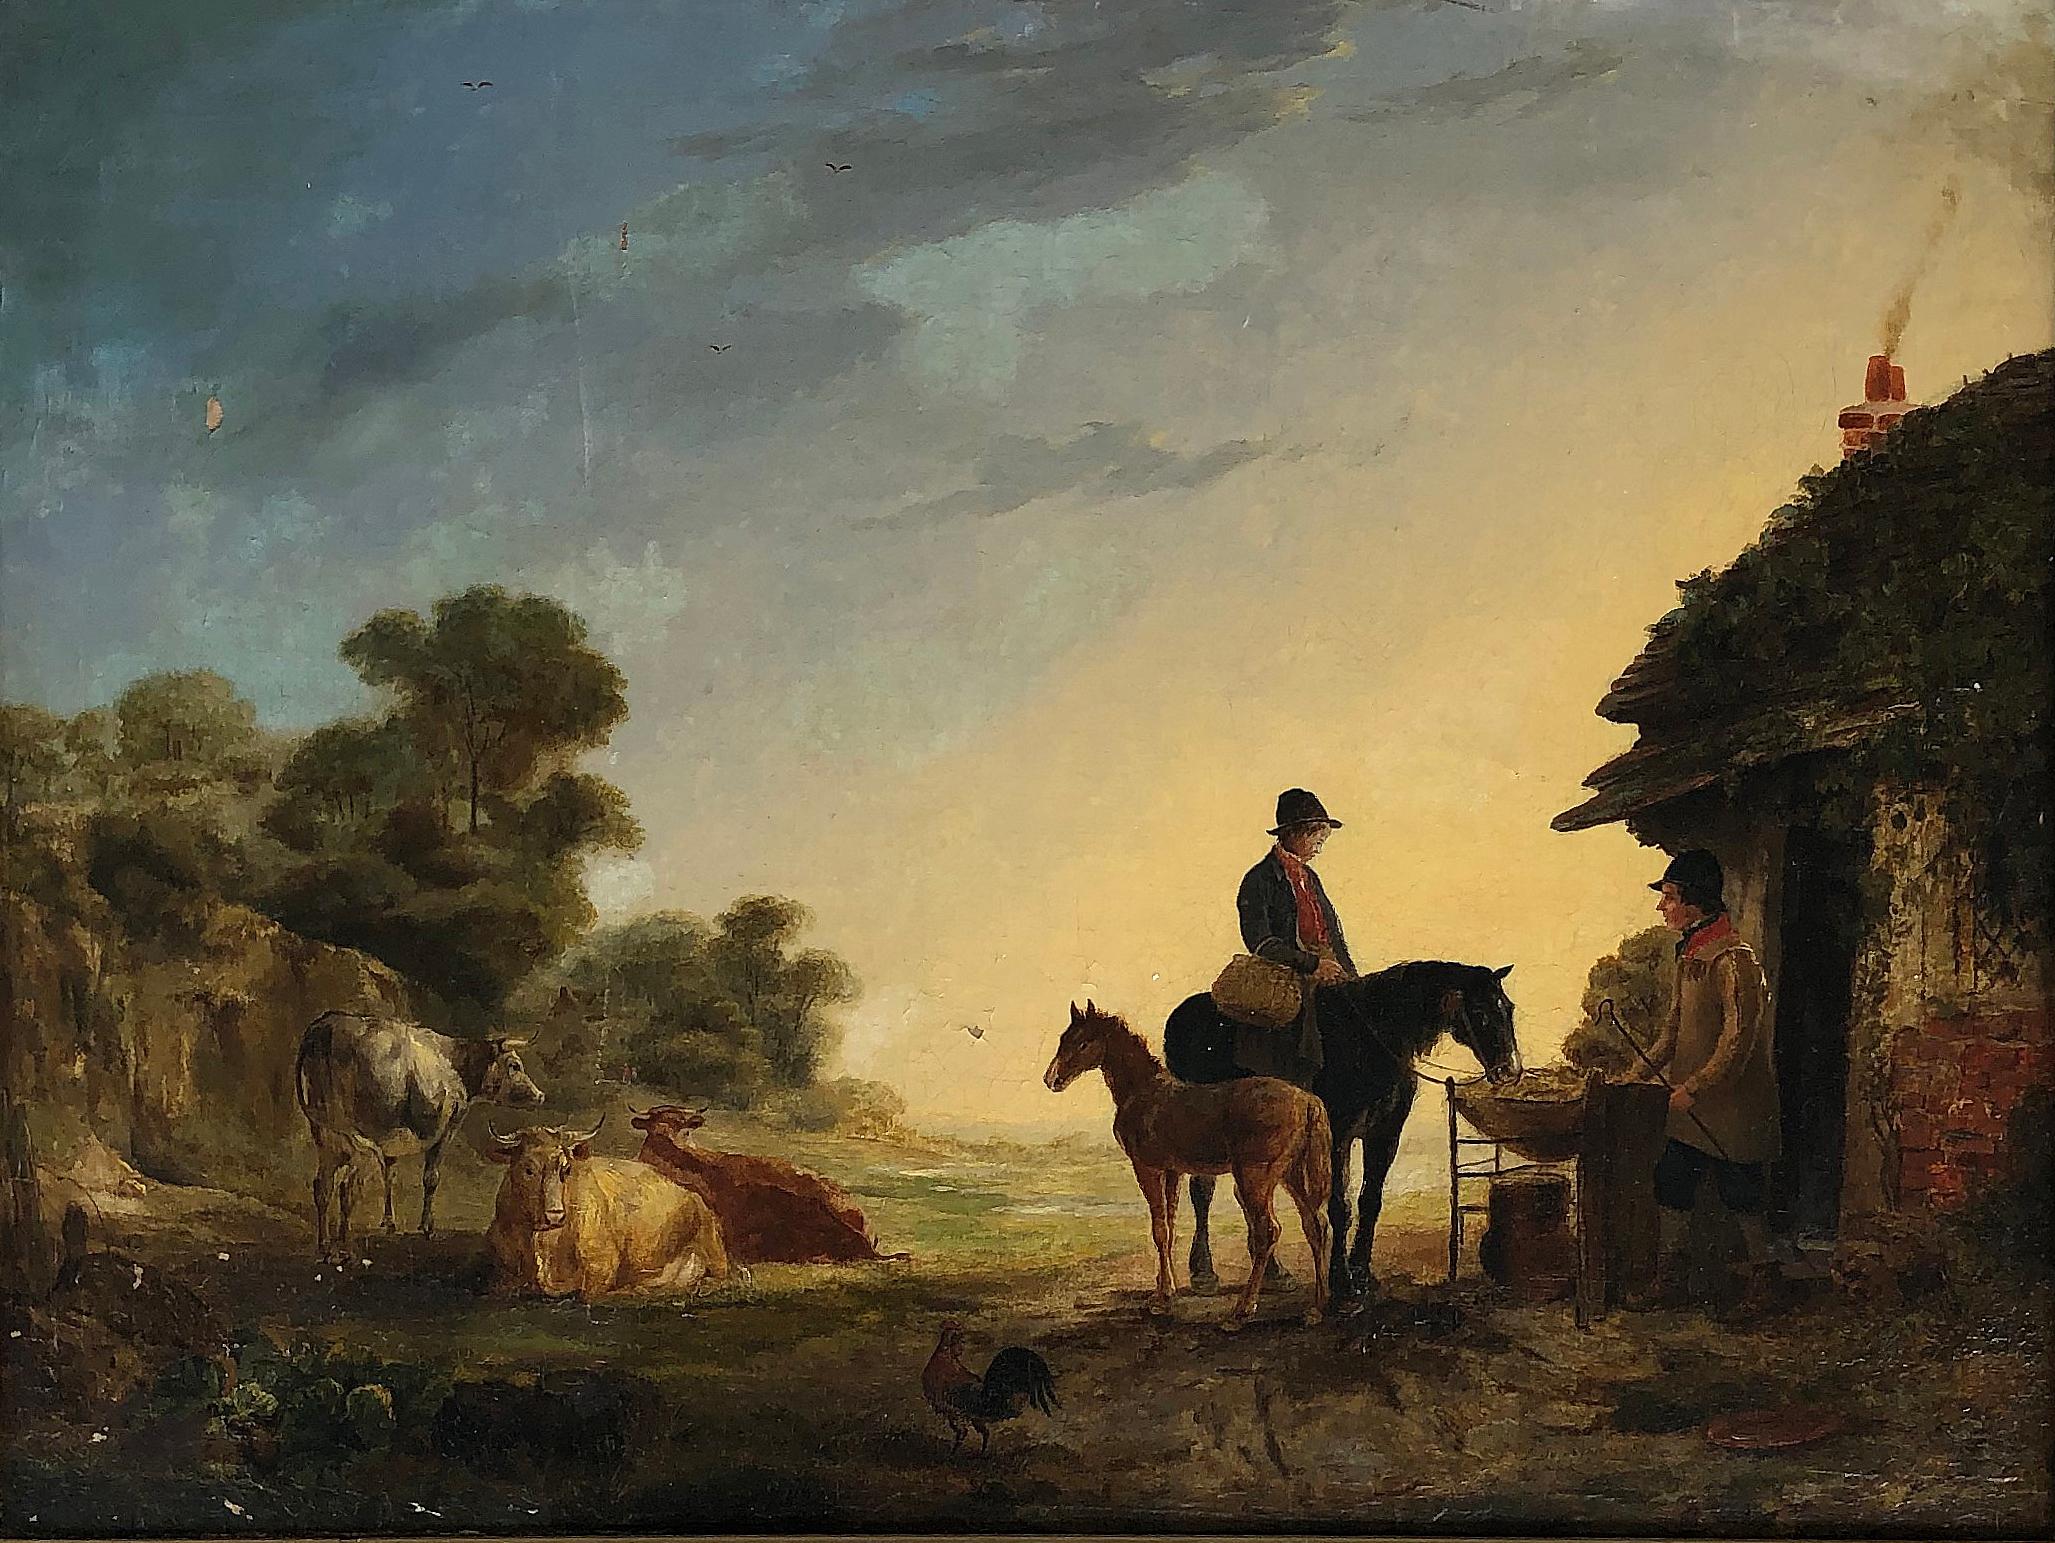 19th century pastoral landscape oil painting, horses and cows

Offered for sale is a fine antique 19th century oil painting on canvas depicting horses and cows grazing in the European country-side. The painting is a generous size and is presented